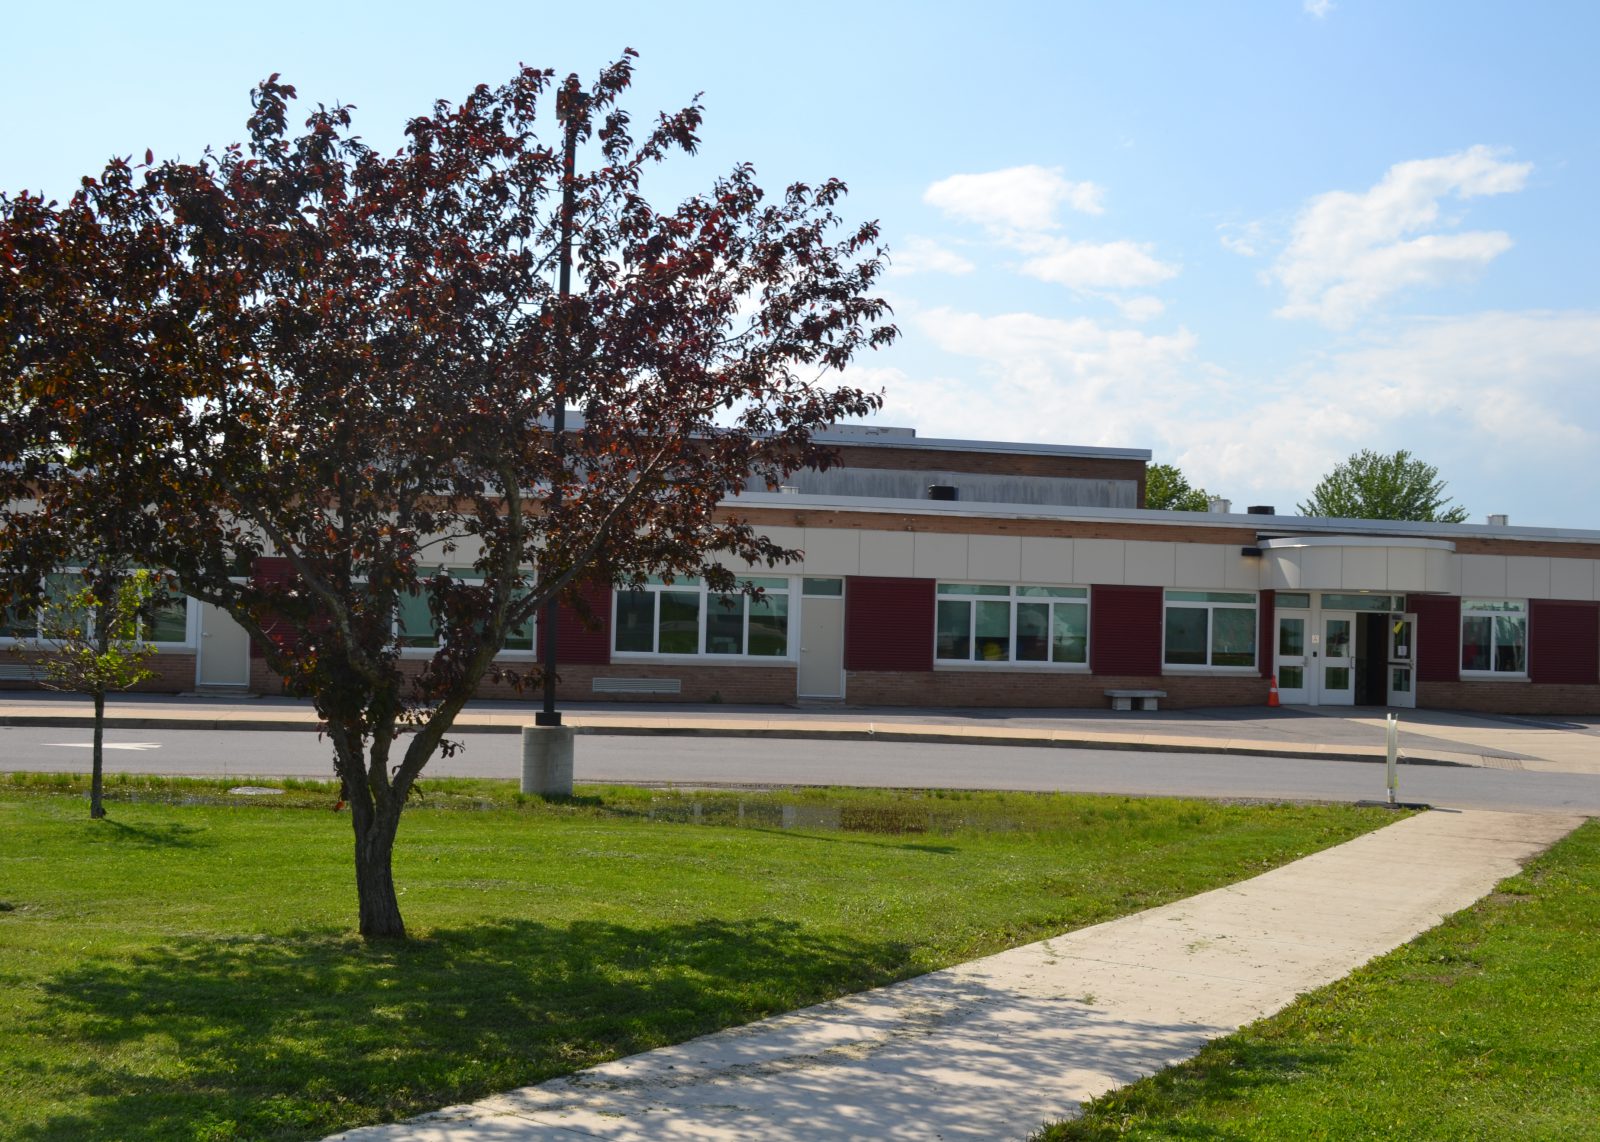 The front exterior of Craig Elementary School, facing the main entrance